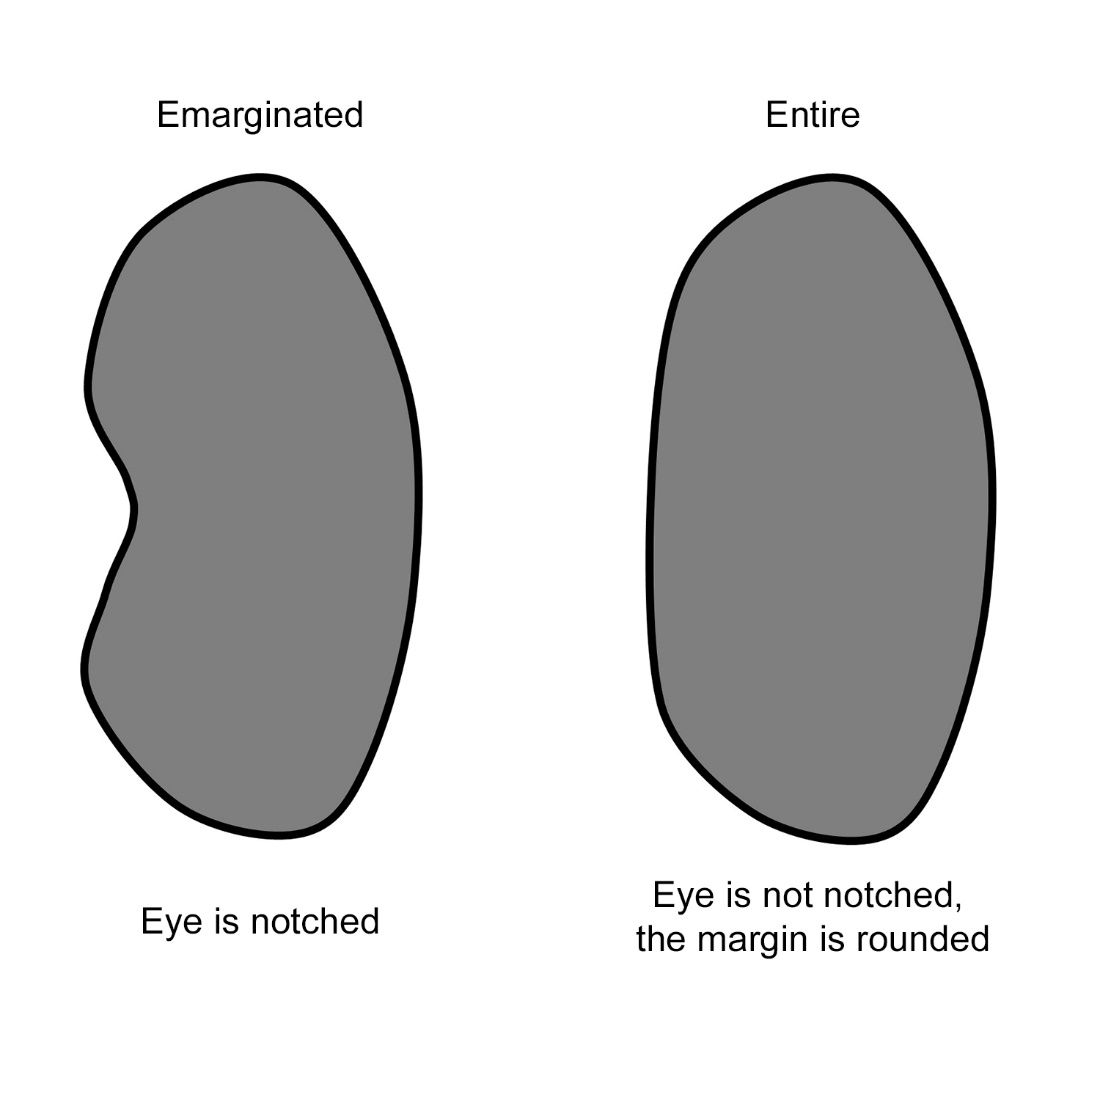 Differences in eye shape between some bark beetles. CBB has an emarginated eye. 